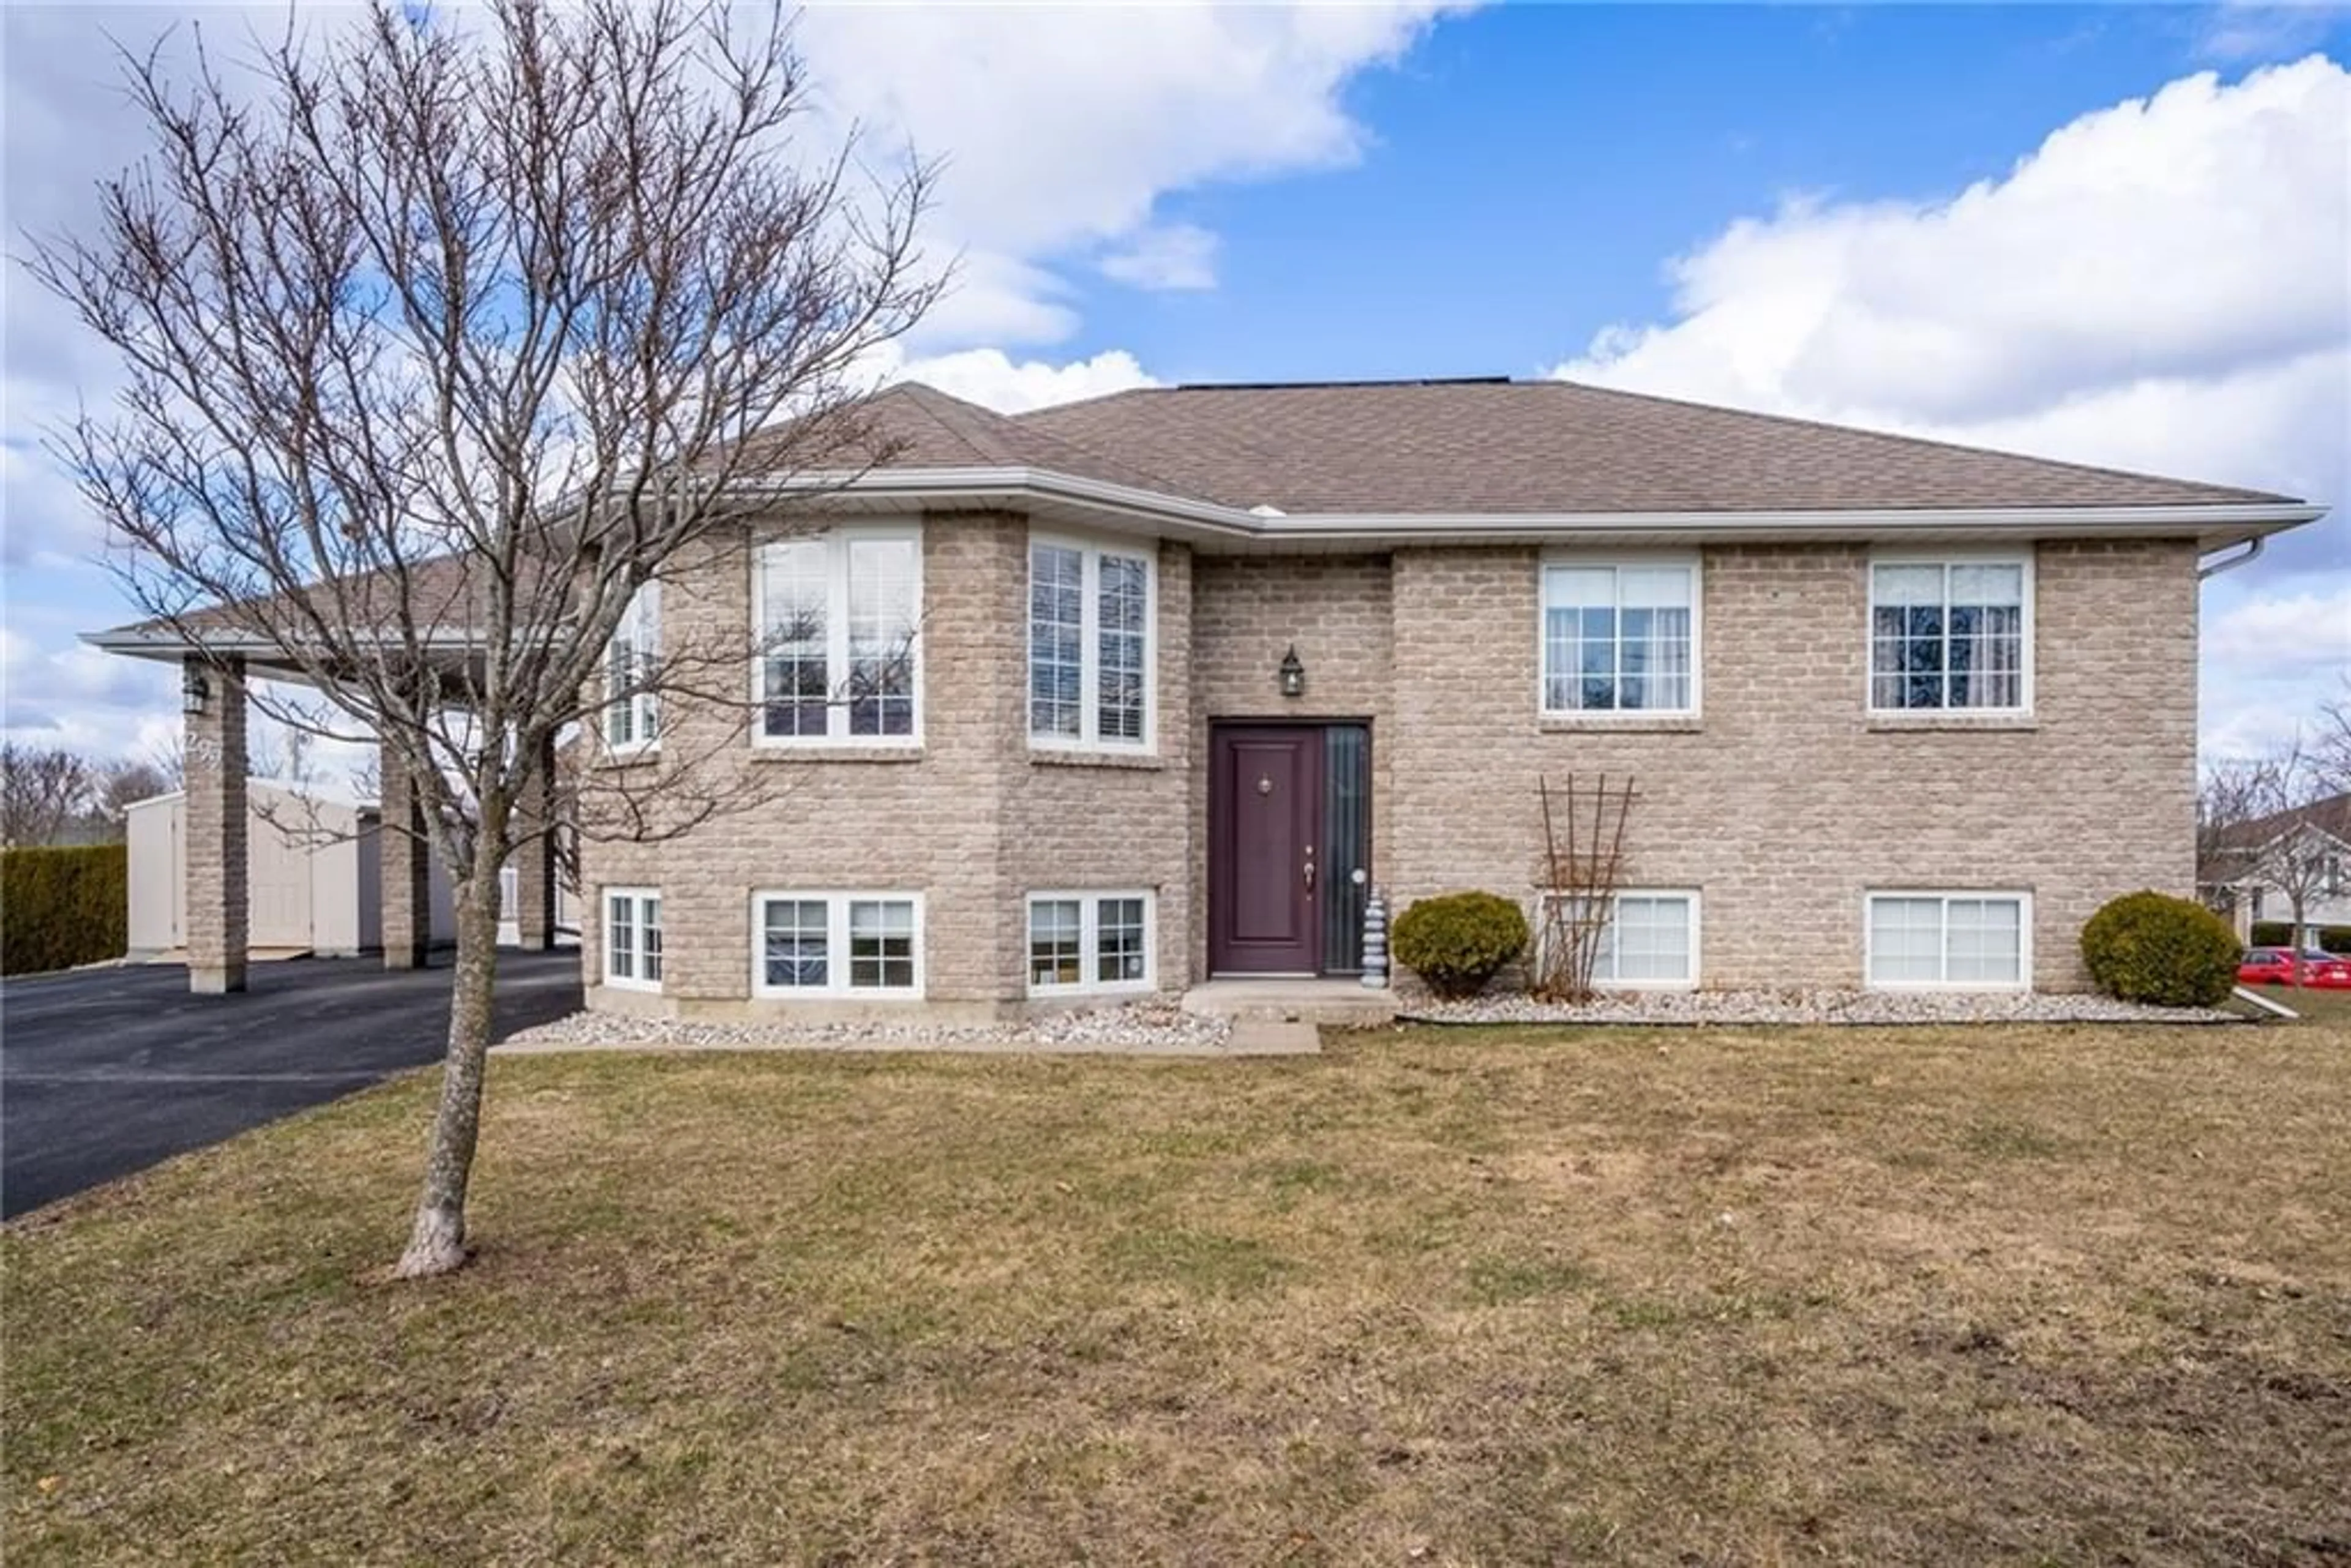 Home with brick exterior material for 299 VALERIE ELIZABETH Crt, Cornwall Ontario K6H 7N5